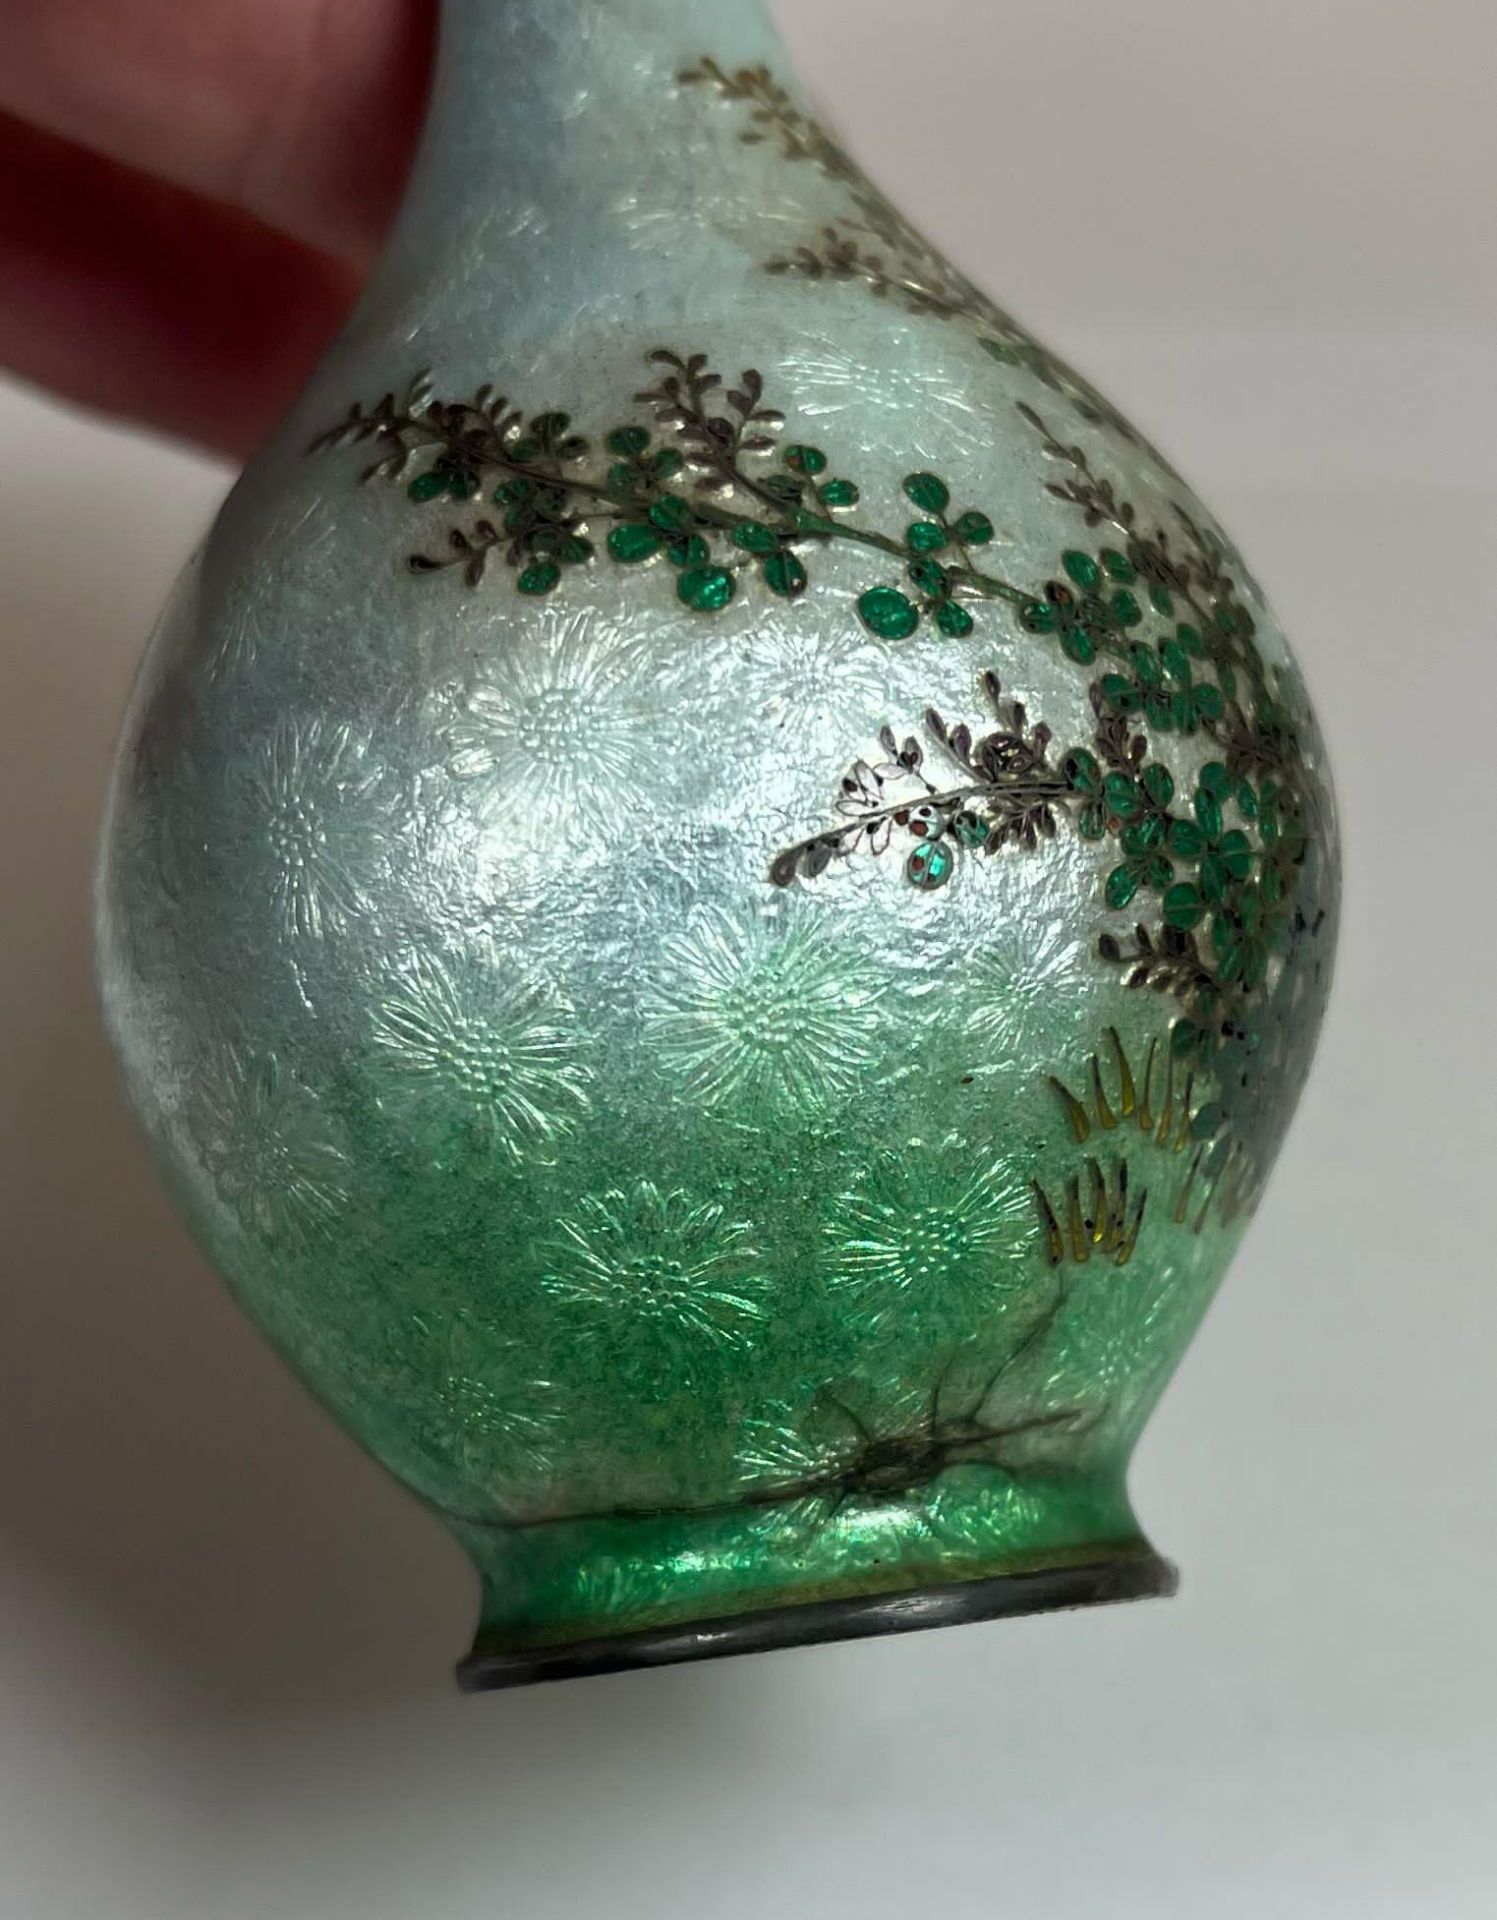 A JAPANESE GINBARI MEIJI PERIOD (1868-1912) GREEN ENAMEL VASE DECORATED WITH A BIRD & FLORAL DESIGN, - Image 4 of 7